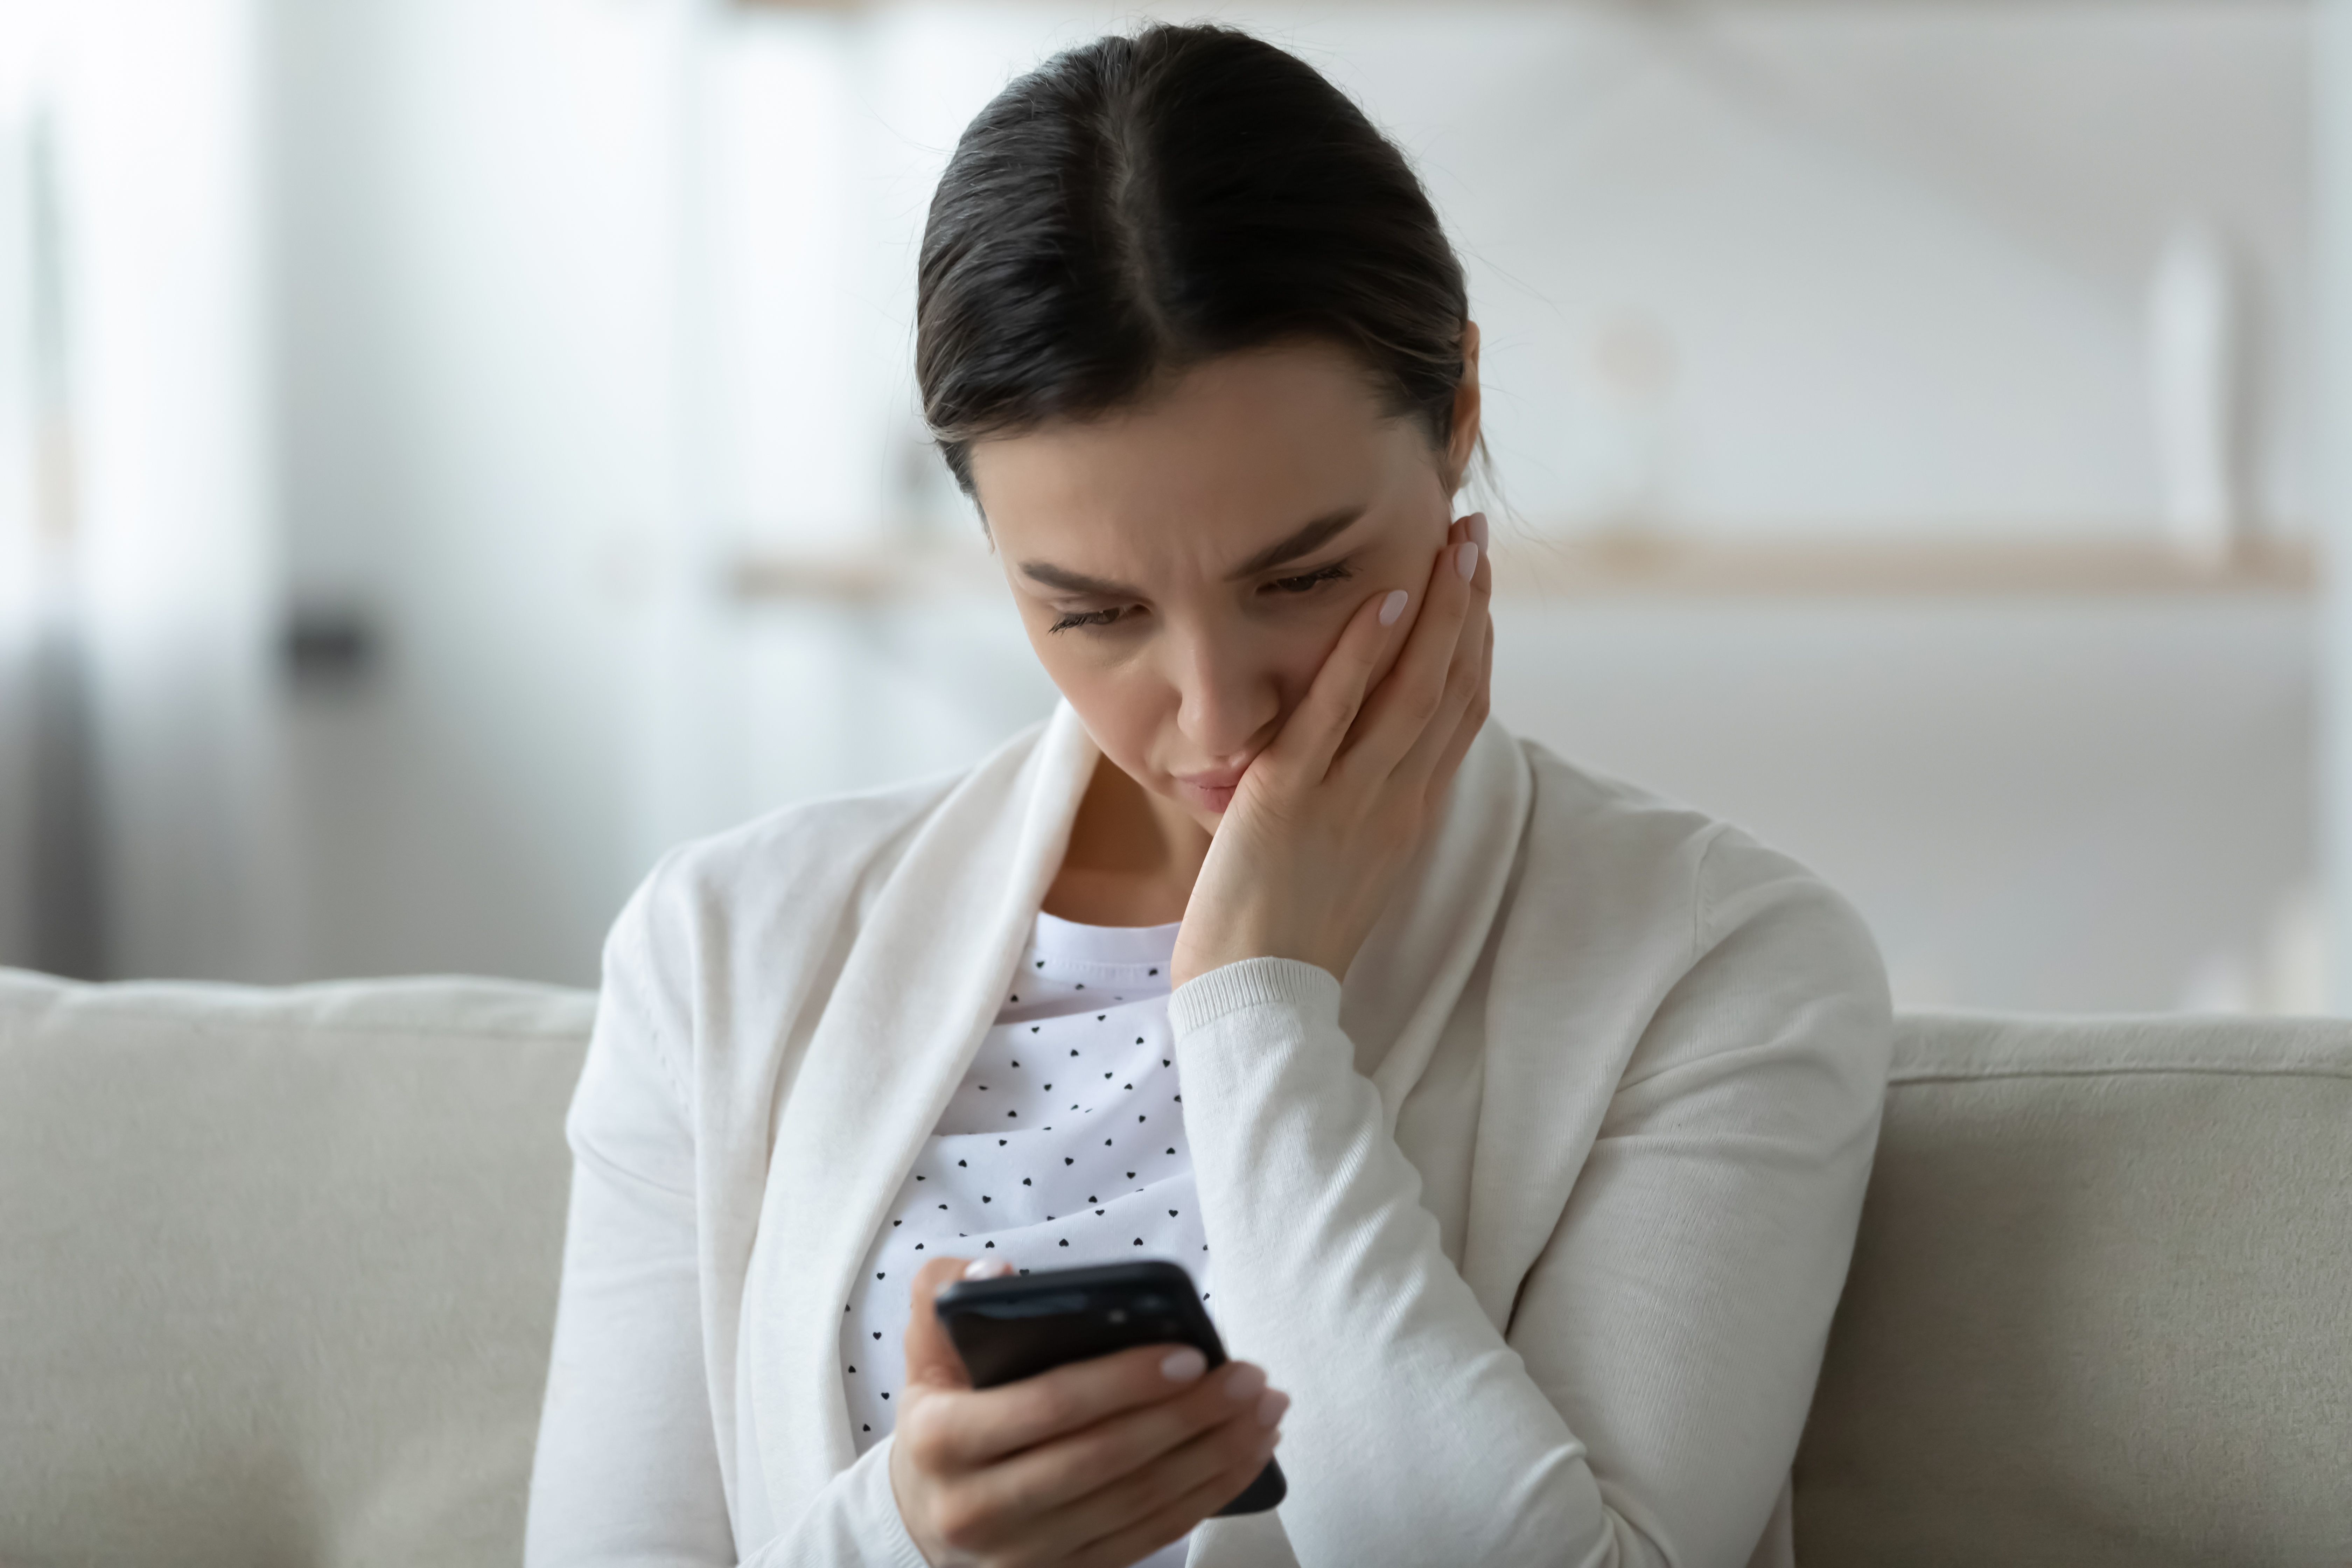 A distraught woman holding and looking at her smartphone | Source: Shutterstock